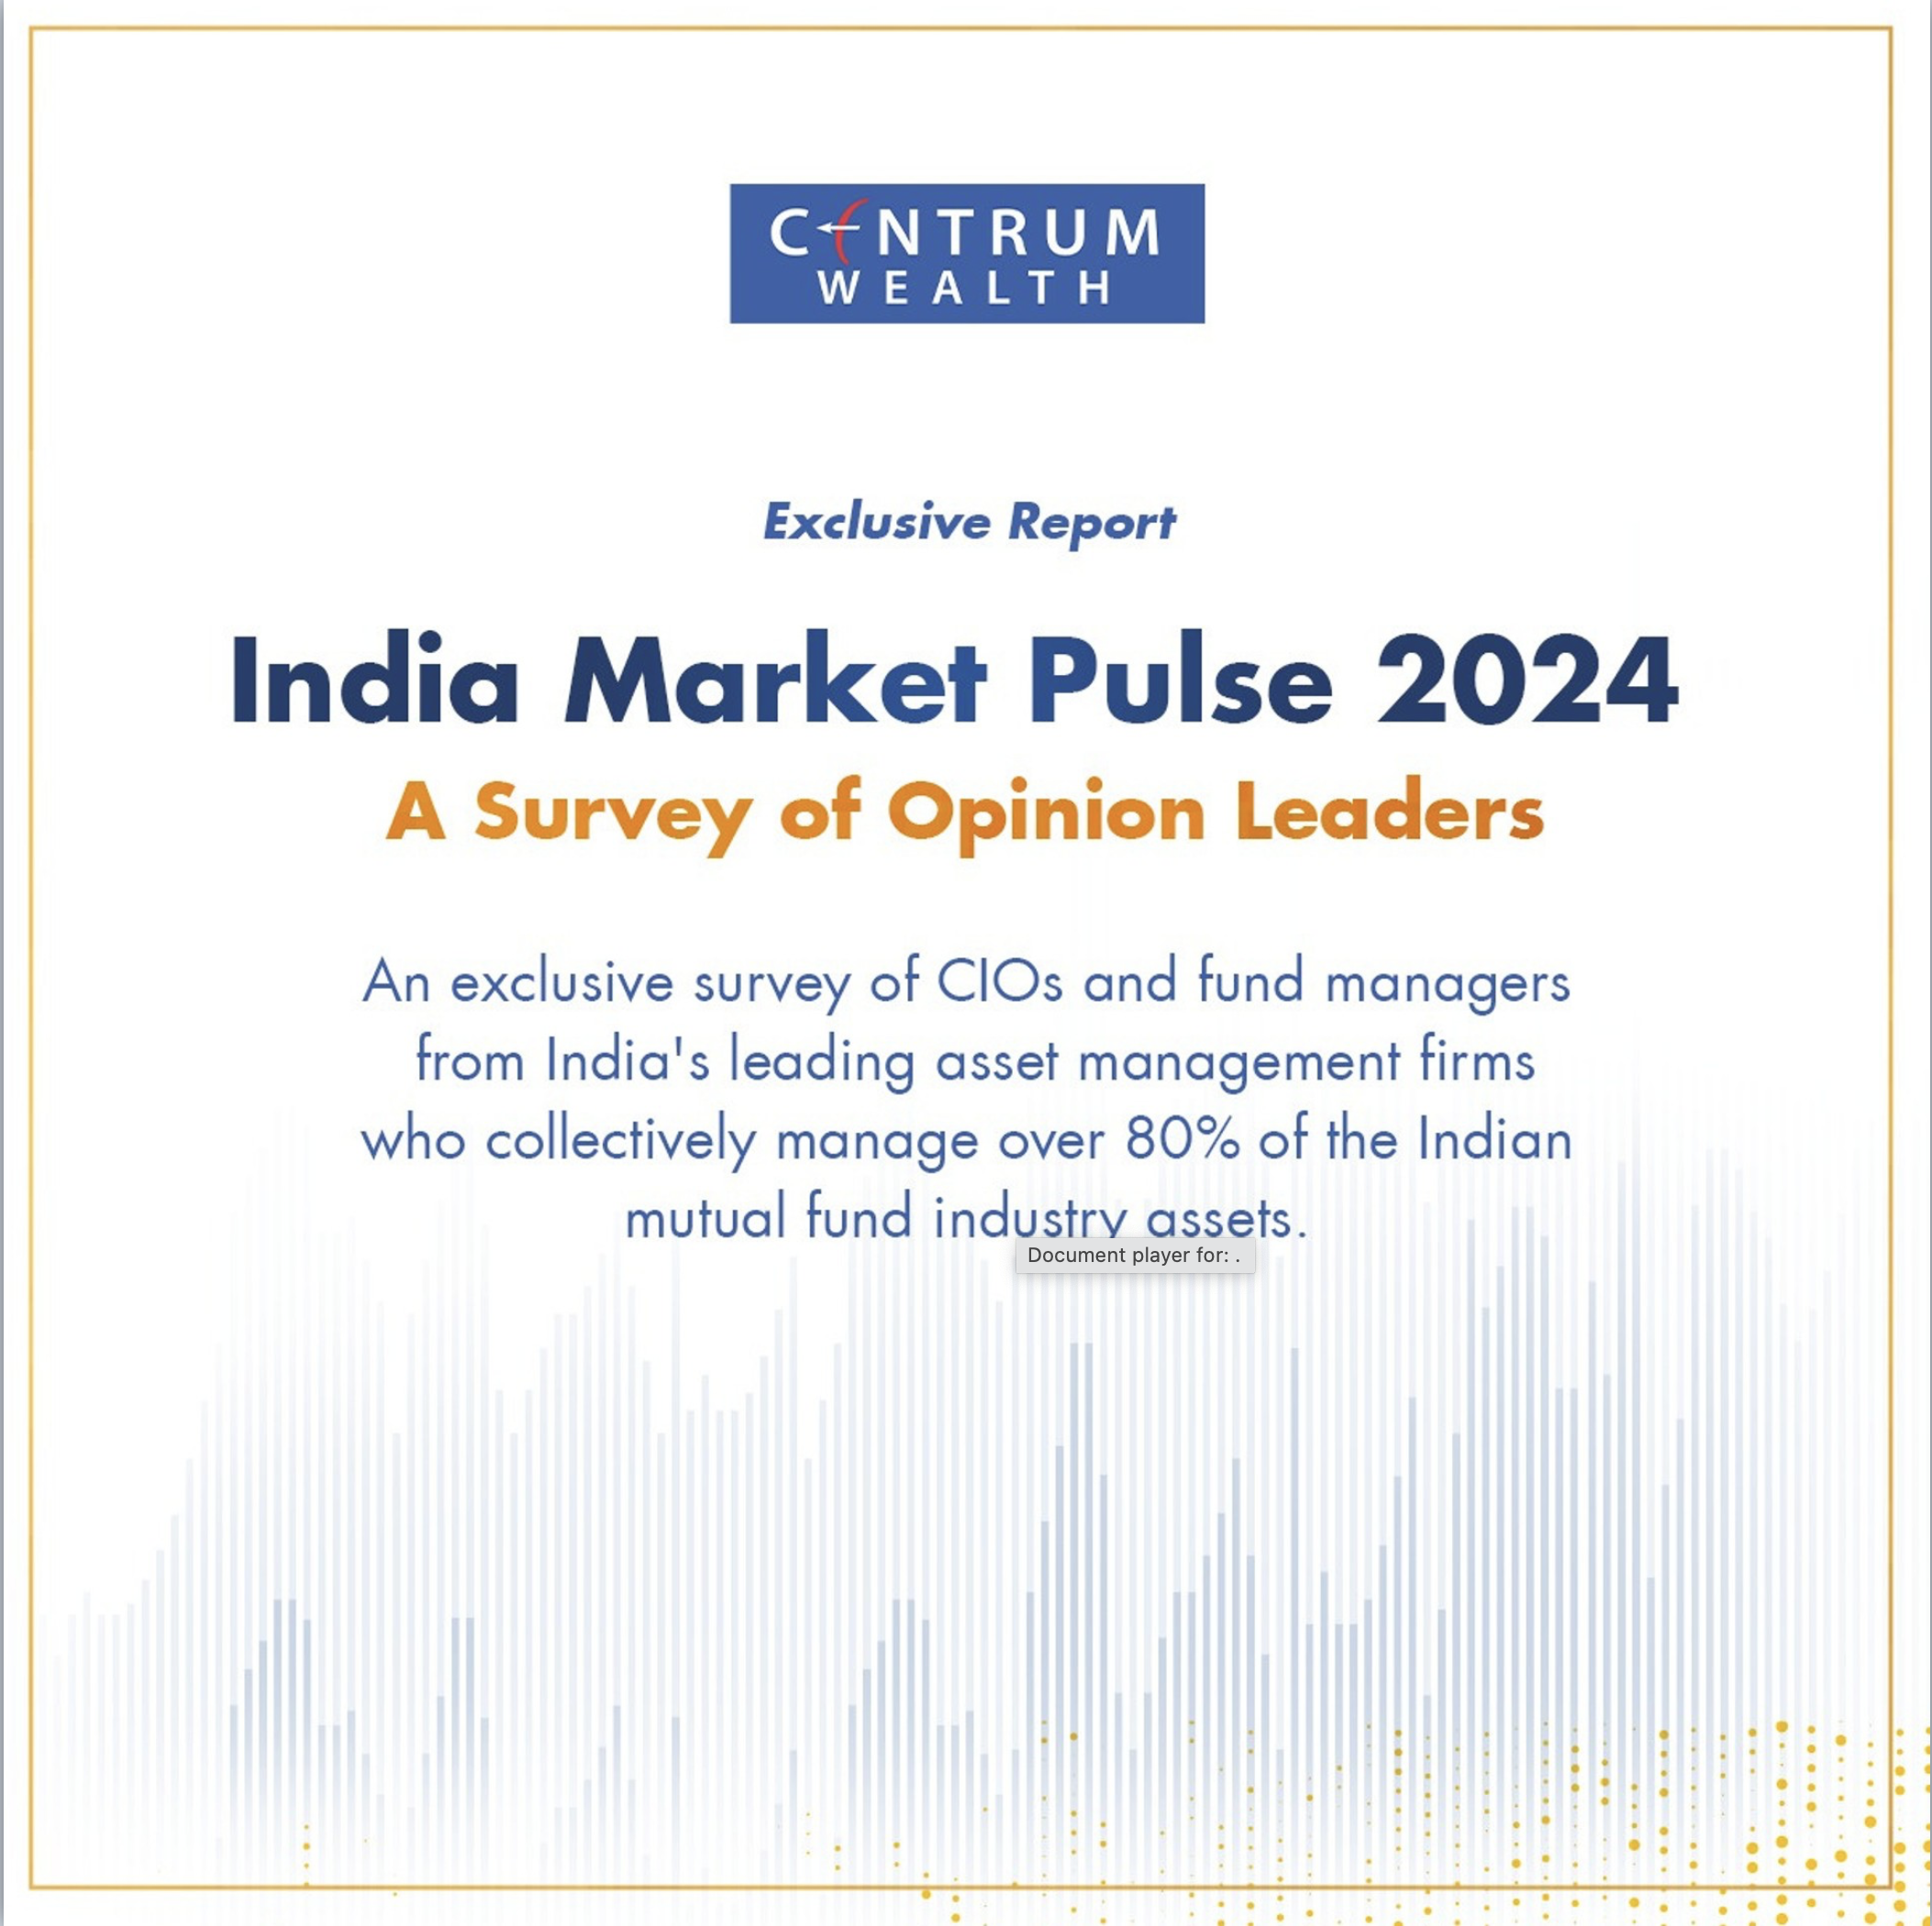 Centrum Wealth releases report ‘India Market Pulse 2024: A Survey of Opinion Leaders’